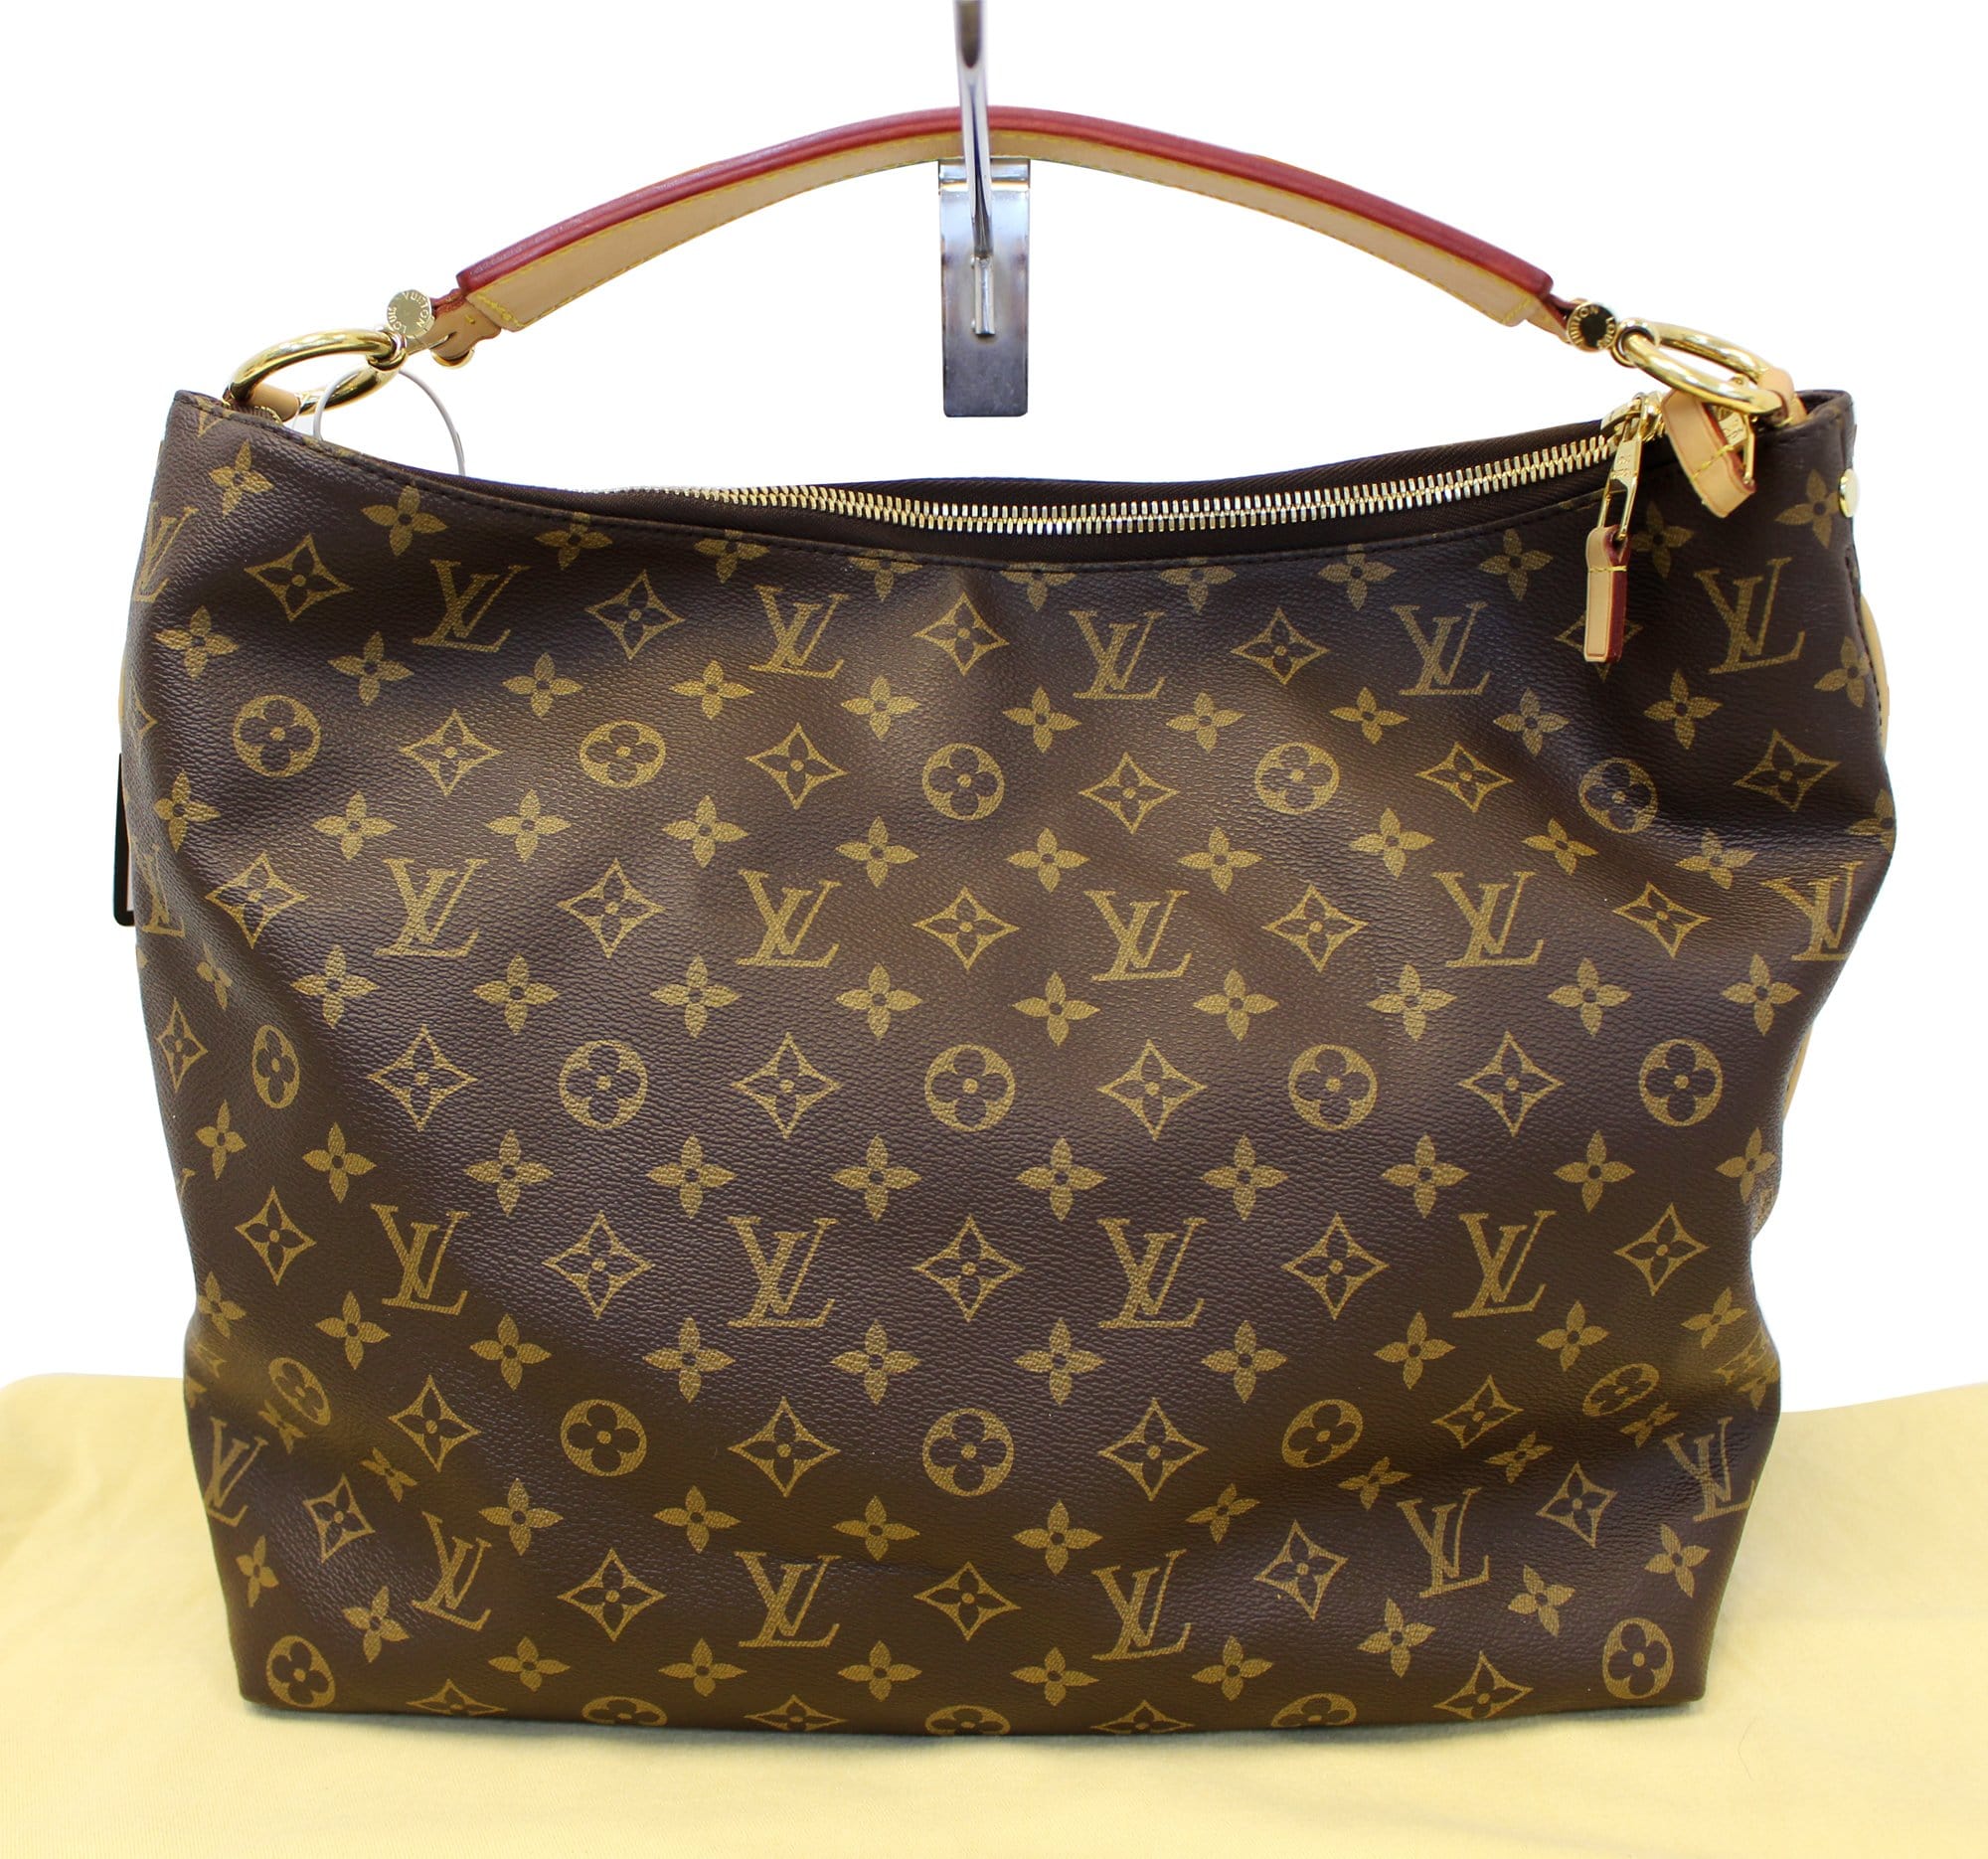 Louis Vuitton Monogram Sully MM😍 $1599😍 hobo style😍 8.5/ 10